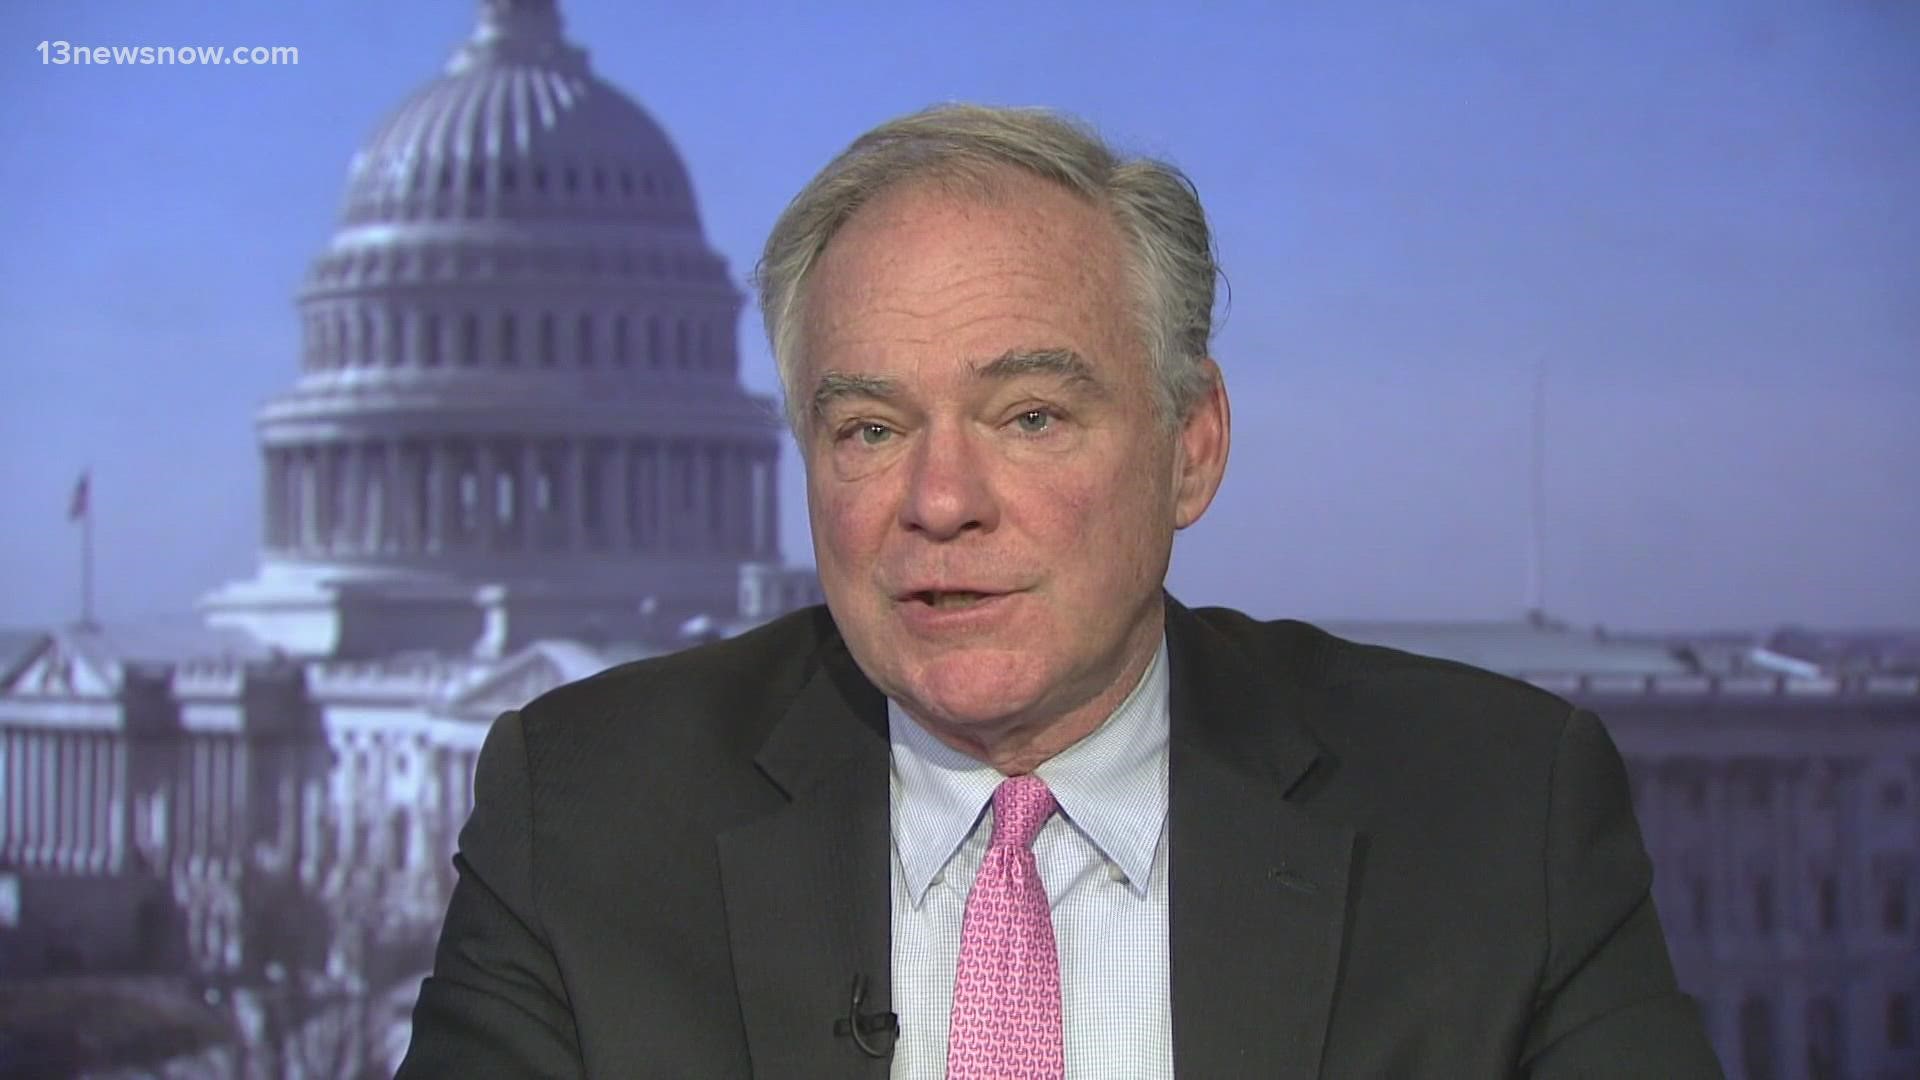 As Congress races to pass a spending bill, Sen. Tim Kaine supports more aid for Ukraine, and he is confident a government shutdown will not happen.